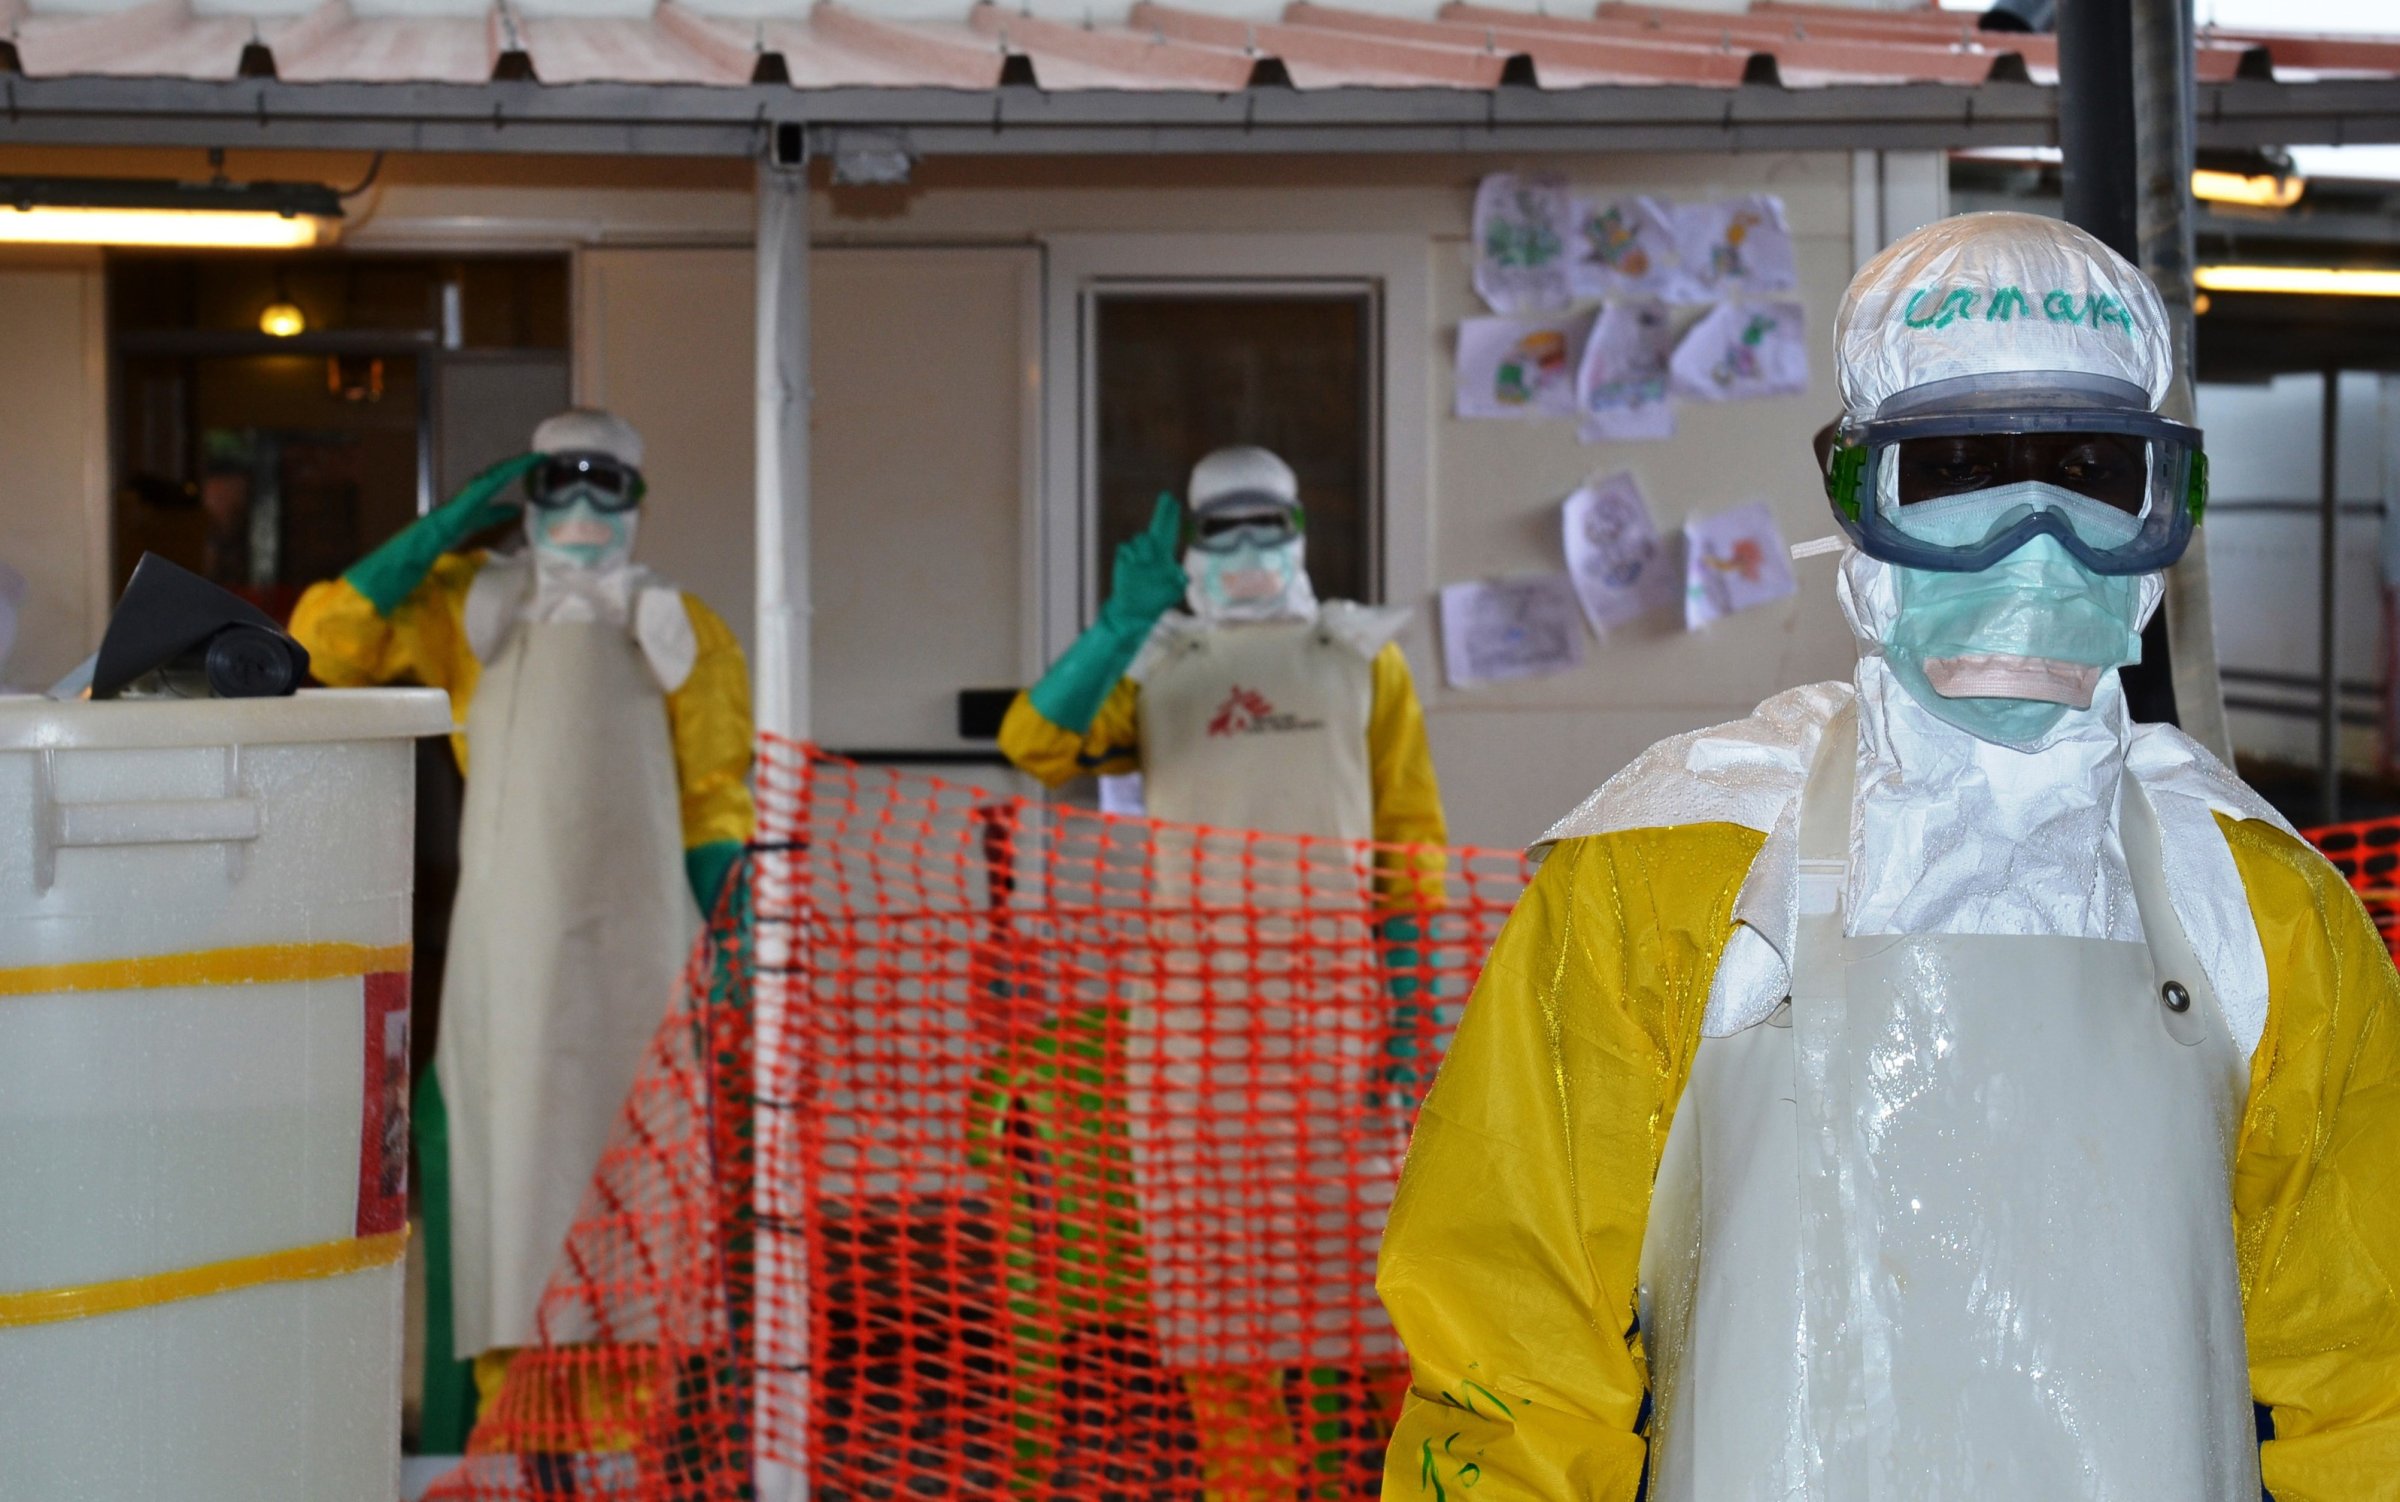 Health workers wearing protective gear gesture at the Nongo ebola treatment centre in Conakry, Guinea, on August 21, 2015.